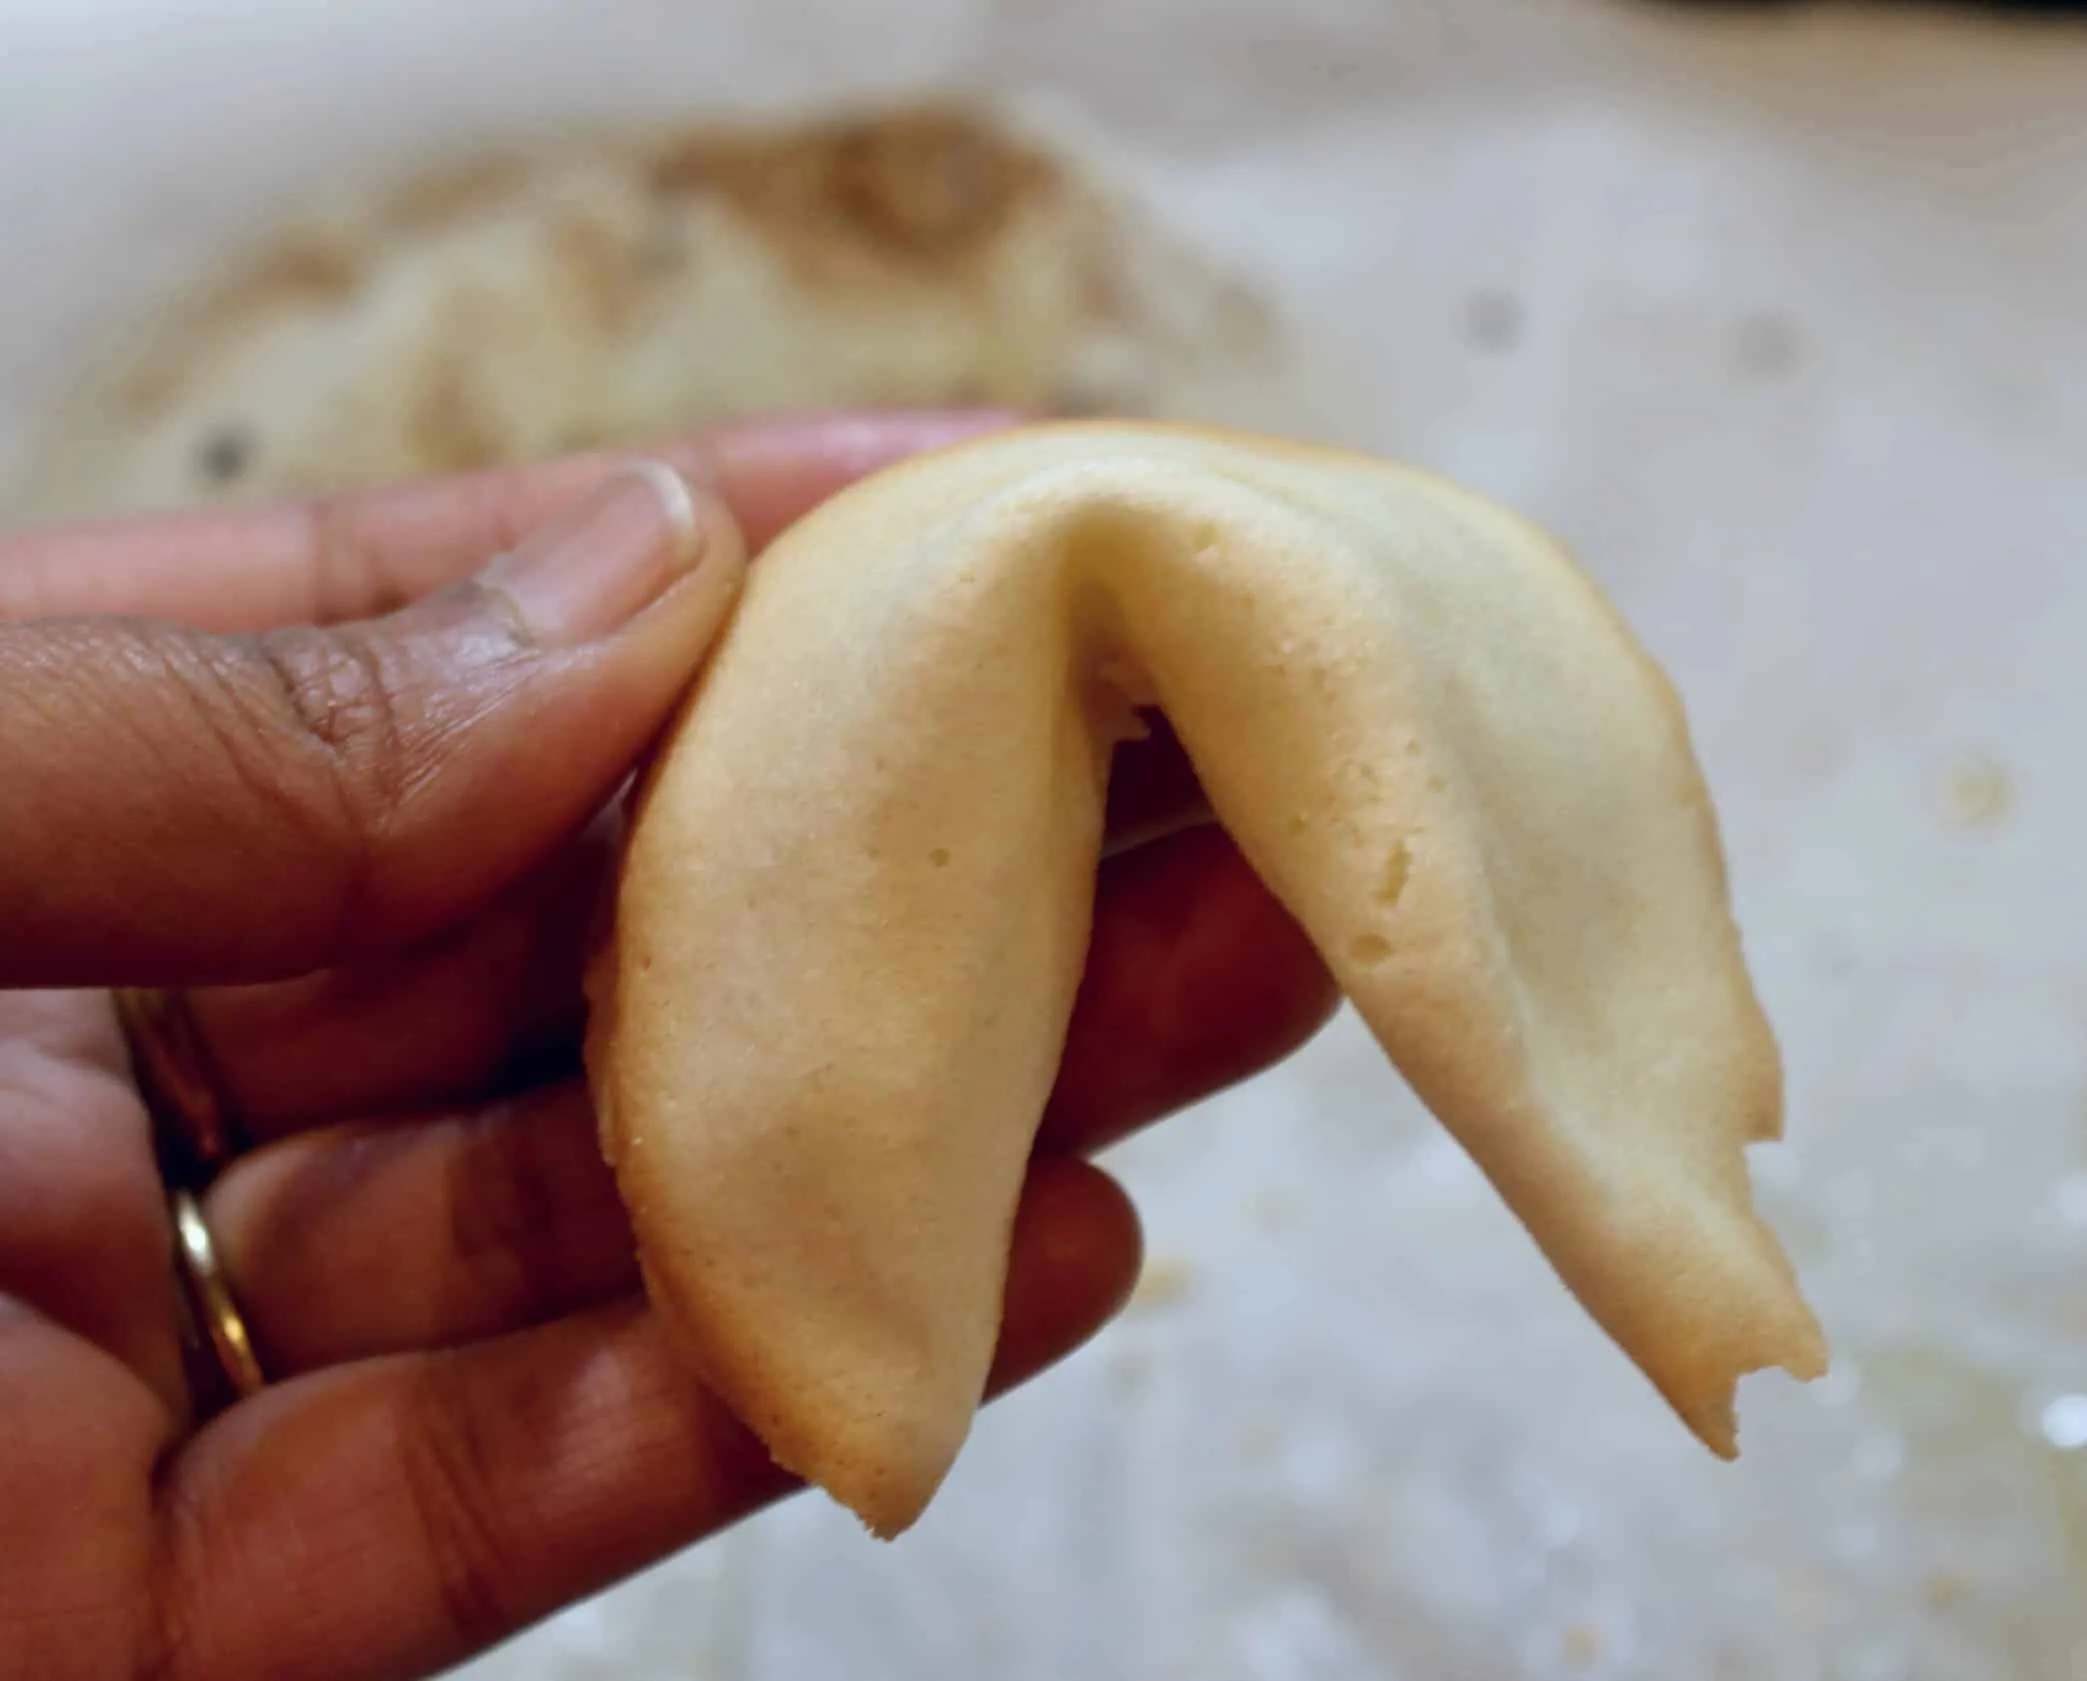 baked and shaped fortune cookies